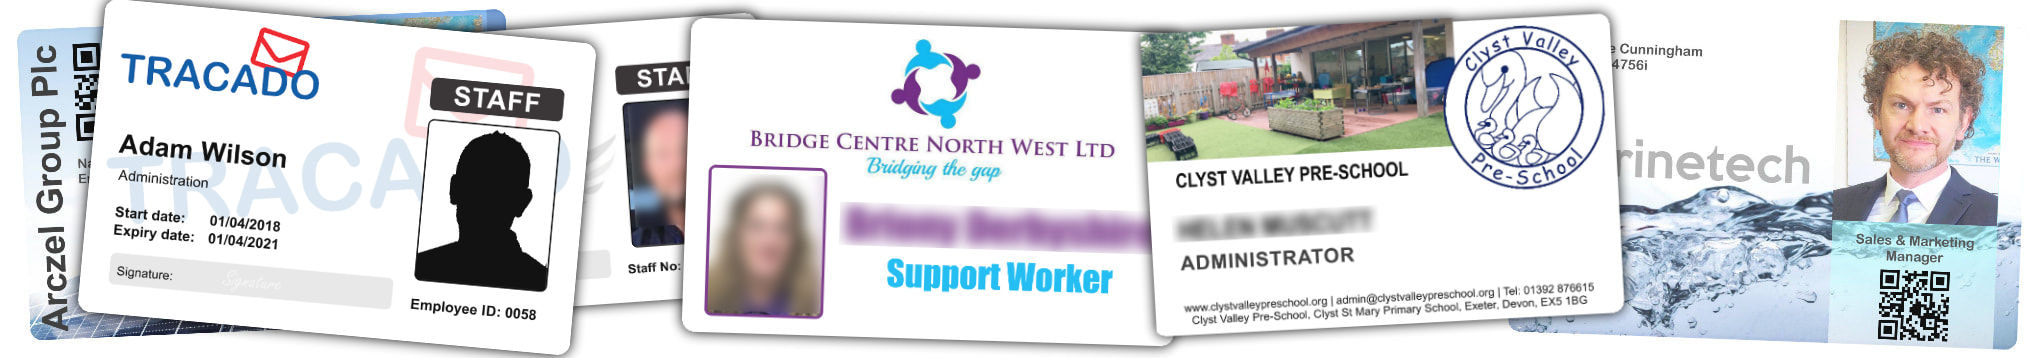 Southend examples of staff photo ID cards | samples of employee Identity card printing | Workers ID cards printed in 